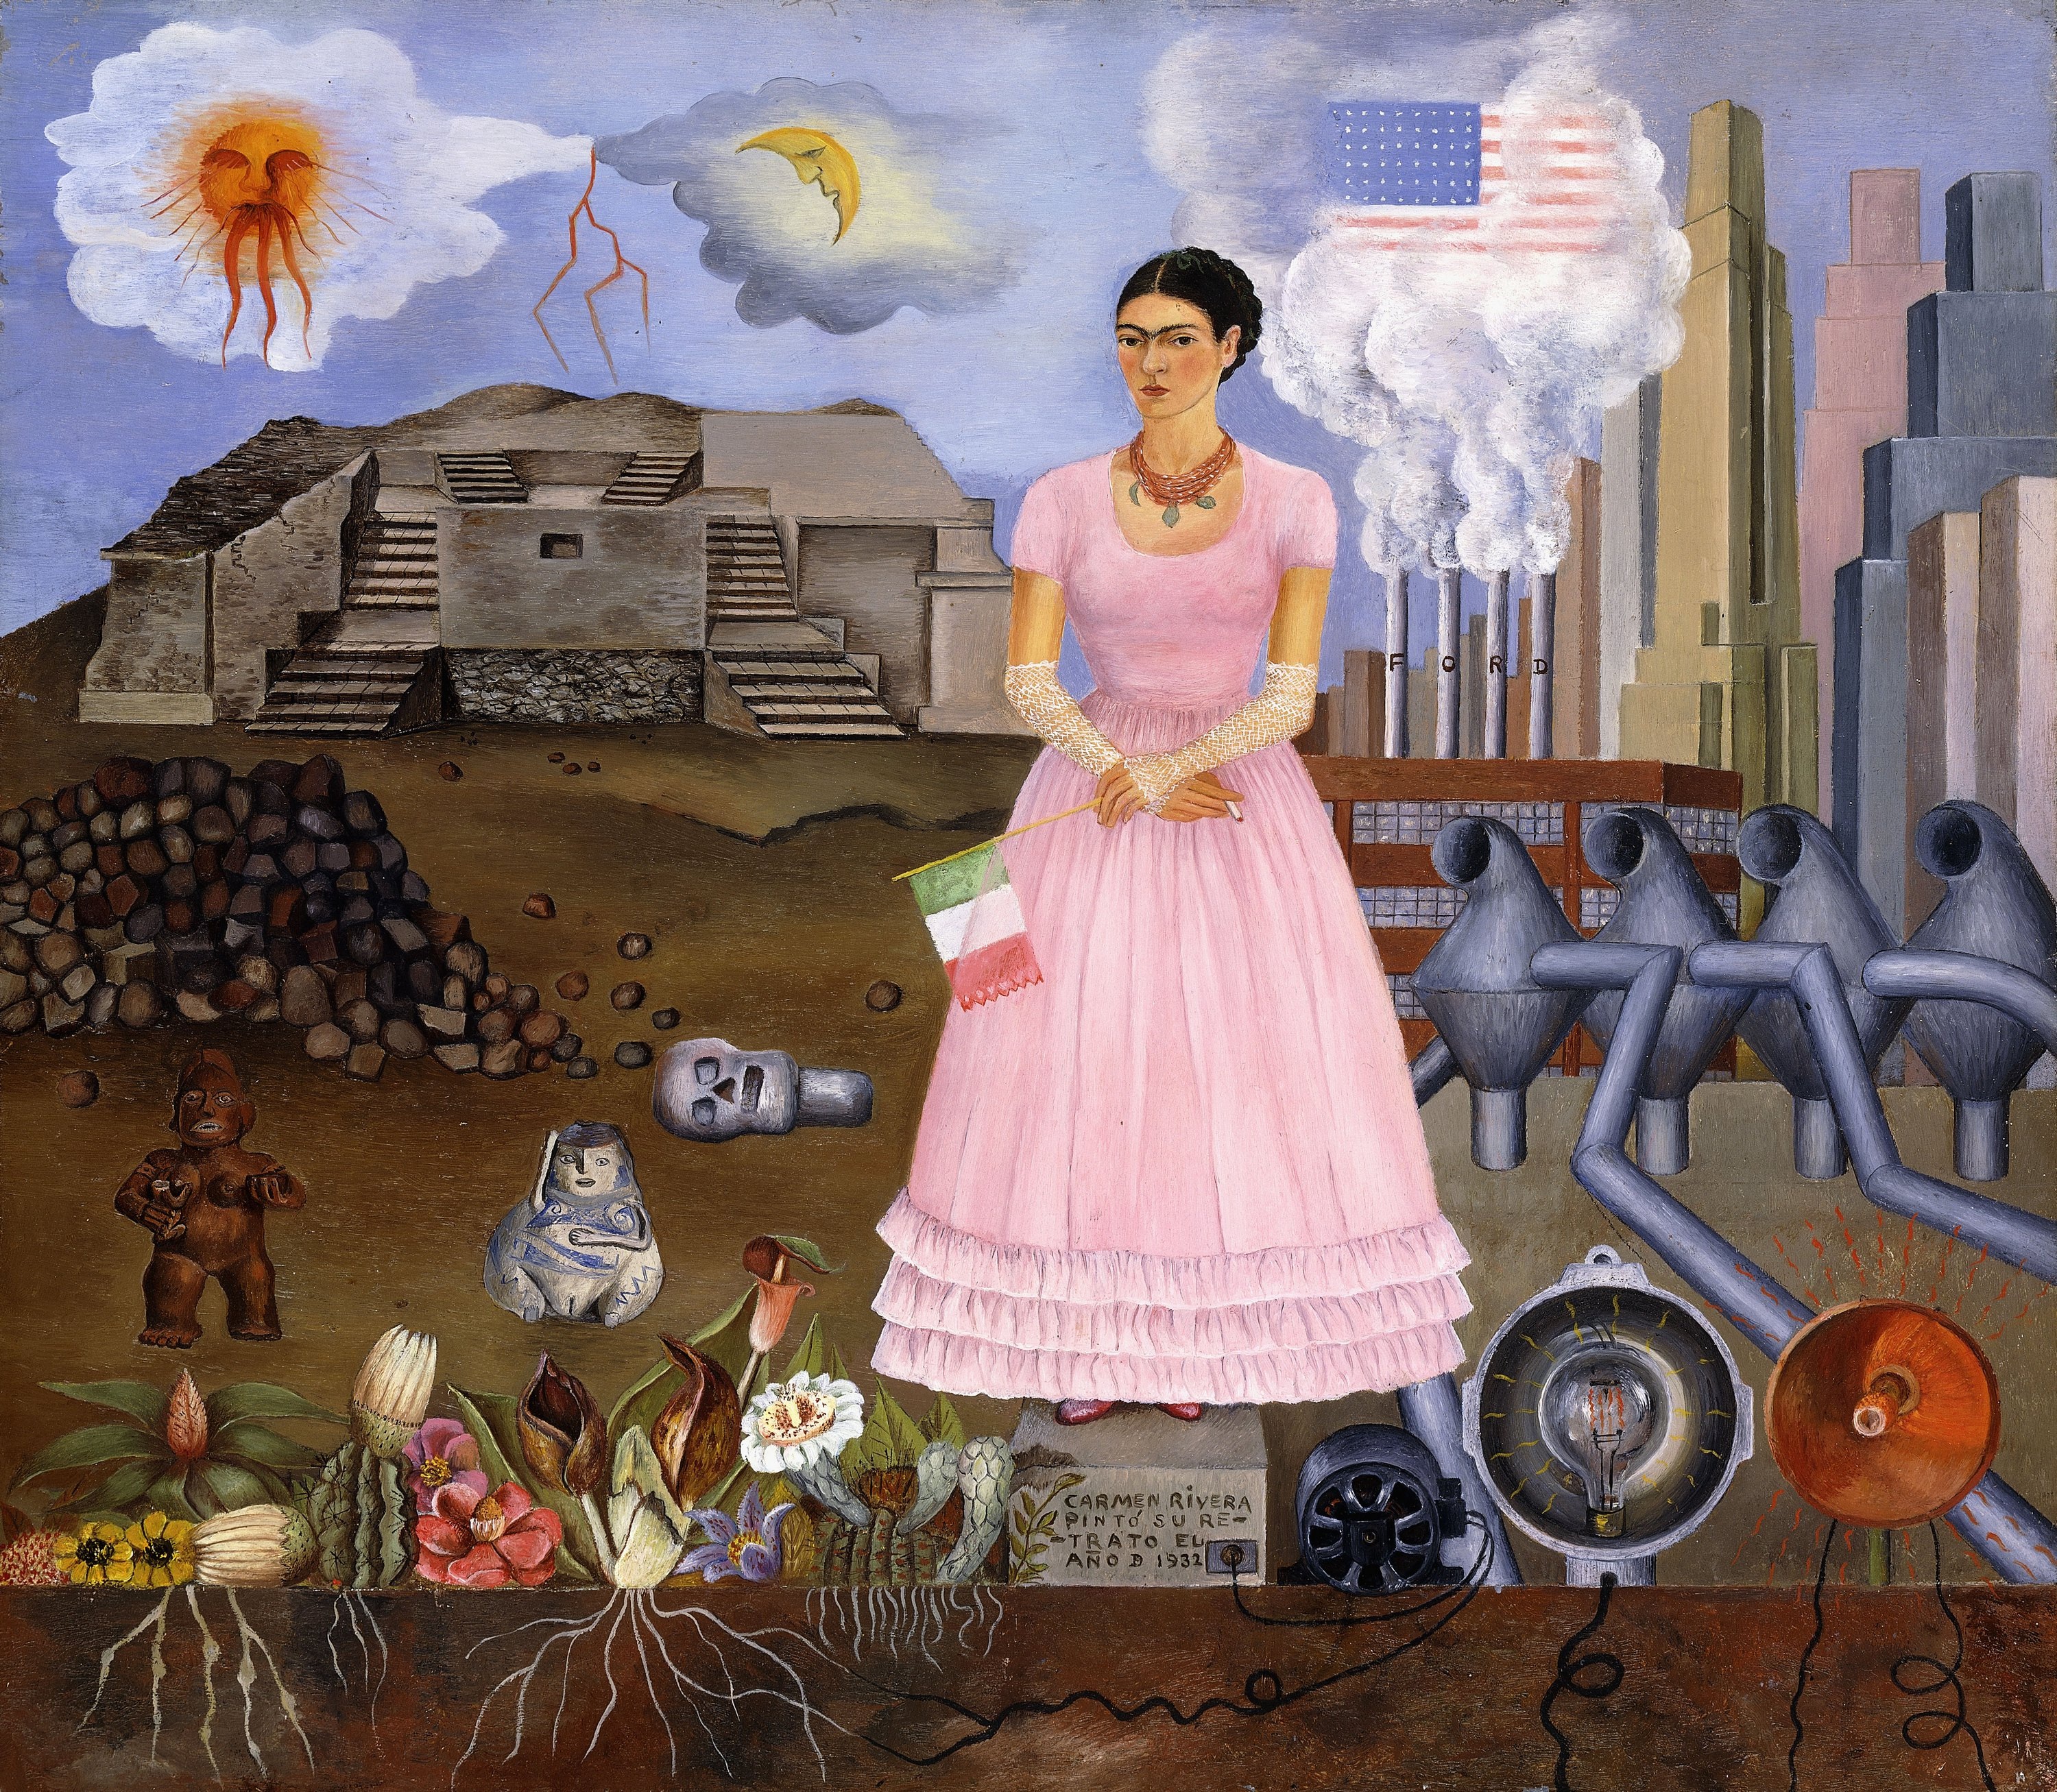 CH991362 Self Portrait on the Border between Mexico and the United States of America, 1932 (oil on tin) by Kahlo, Frida (1907-54); 31x35 cm; Private Collection; (add.info.: Self Portrait on the Border between Mexico and the United States of America; Autorretrato en la Frontera entre Mexico y los Estados Unidos. Frida Kahlo (1910-1954). Oil on tin. Signed and dated 1932. 31 x 35cm.); Photo © Christie's Images; Mexican,  in copyright 